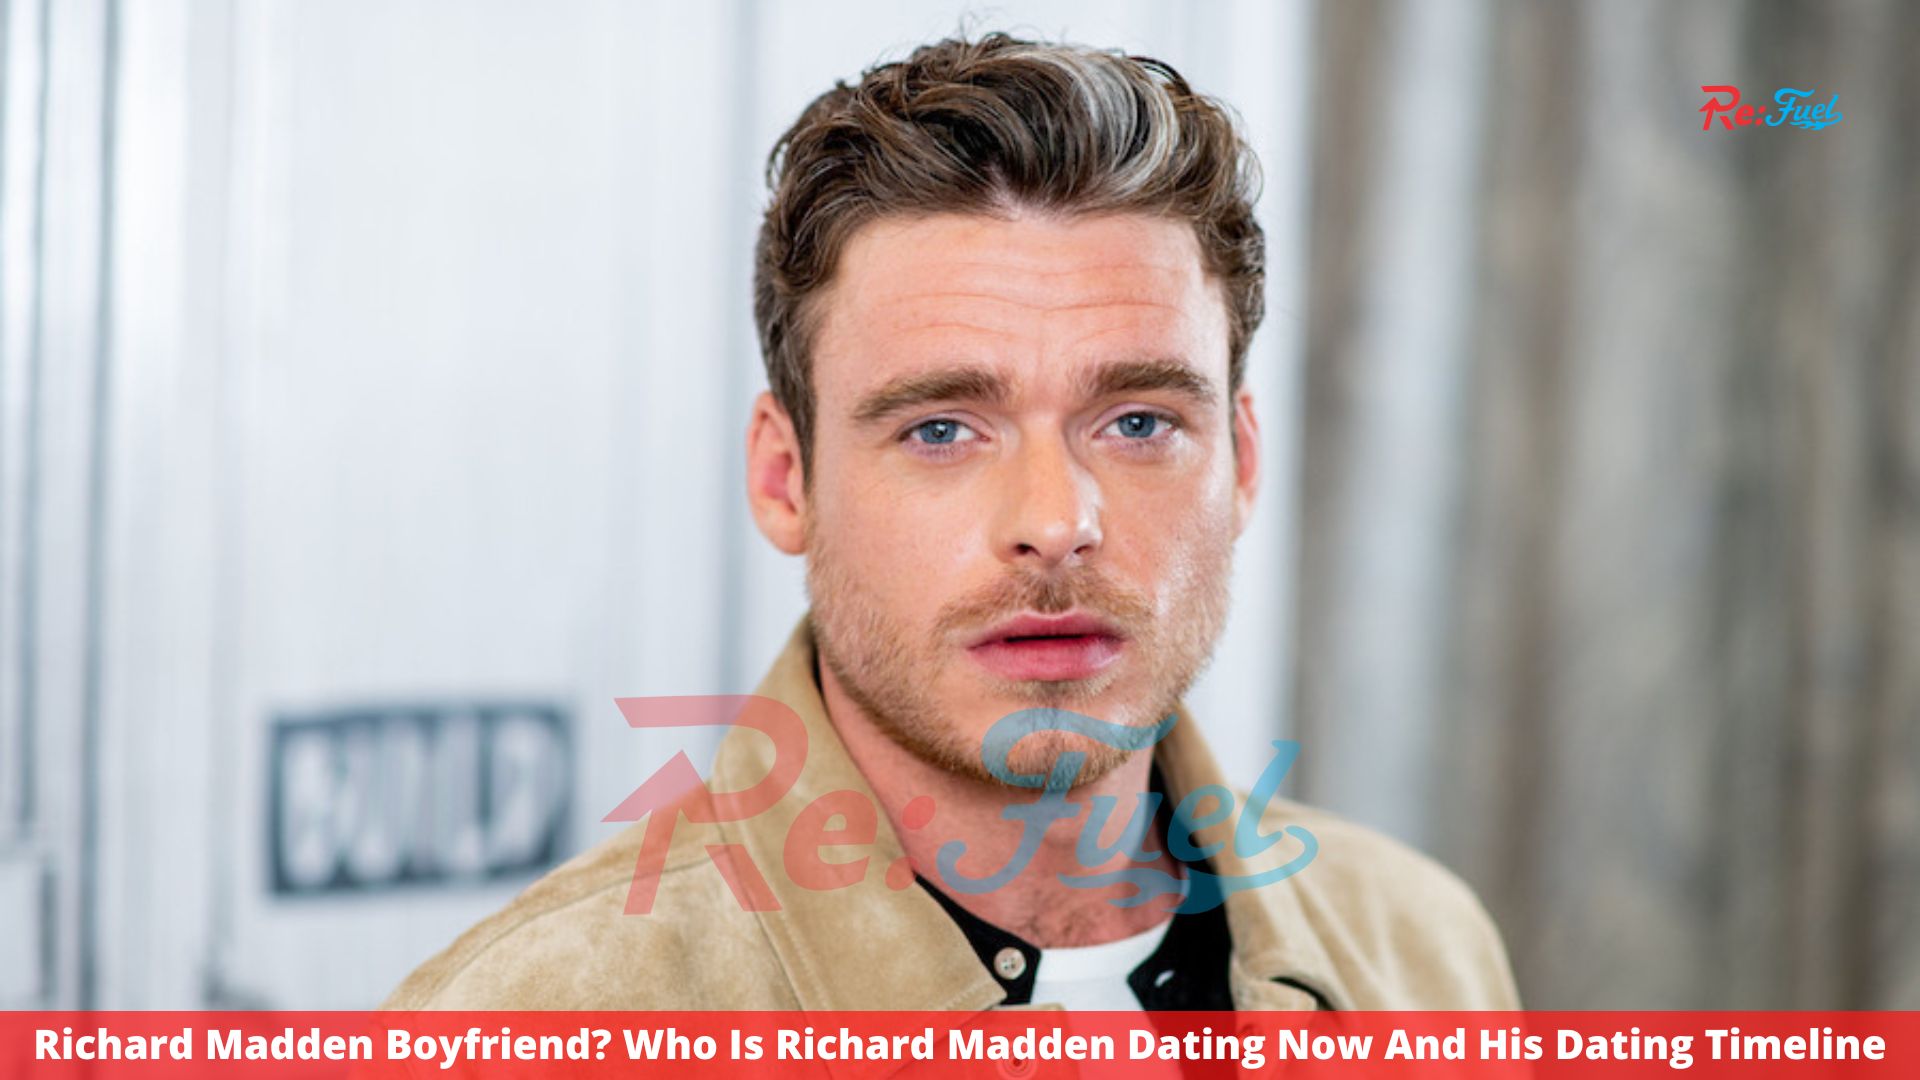 Richard Madden Boyfriend? Who Is Richard Madden Dating Now And His Dating Timeline